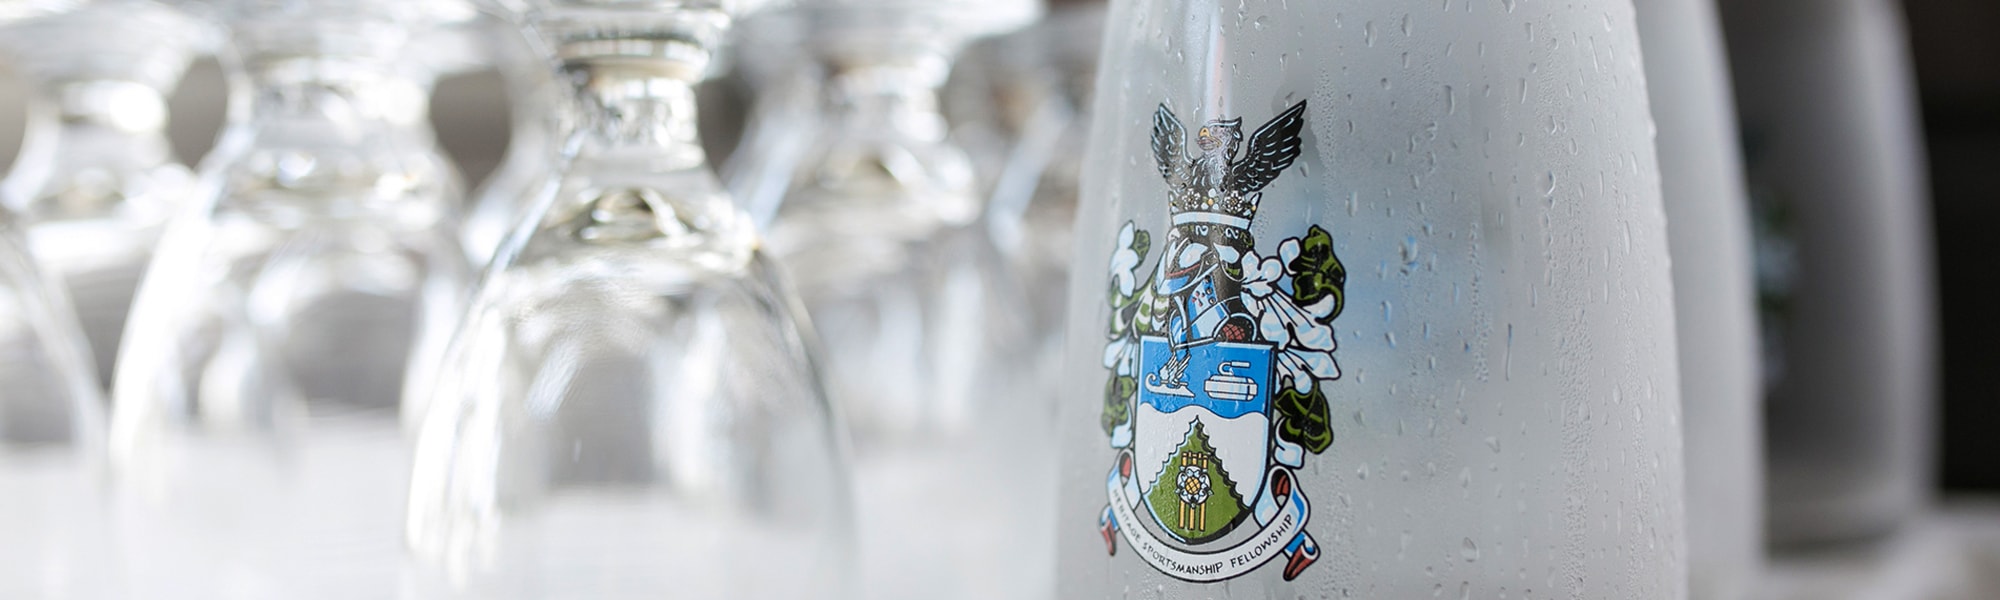 Pitcher of water with the Cricket Club Coat of Arms